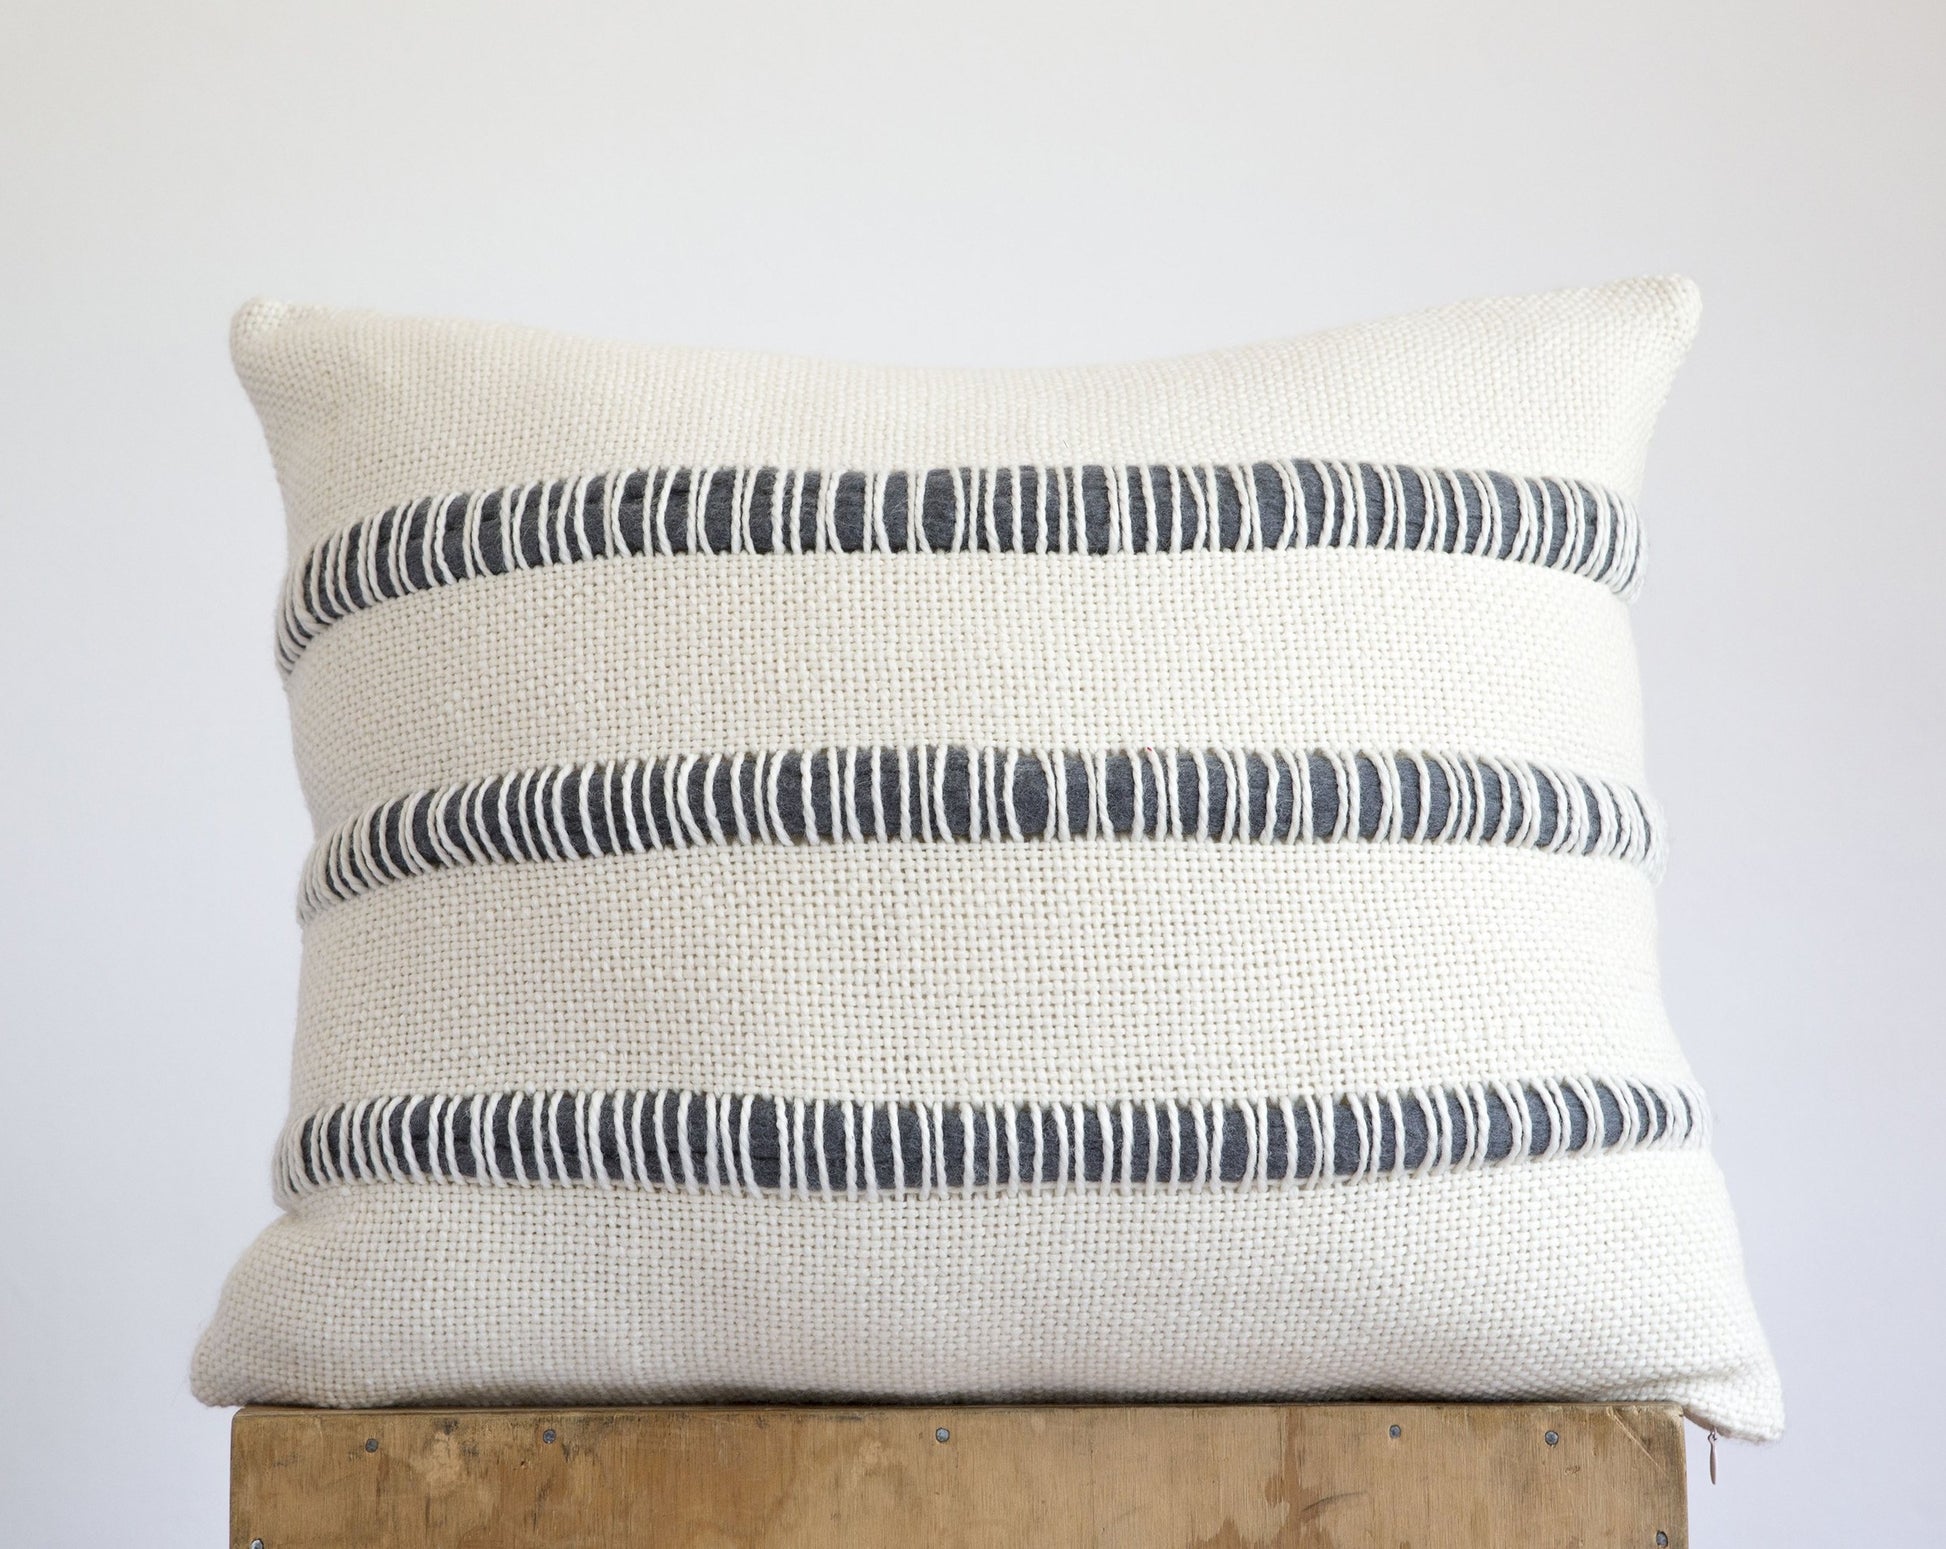 Hand weaving cushion cover with stripes of roving merino wool hand dyed in stone grey